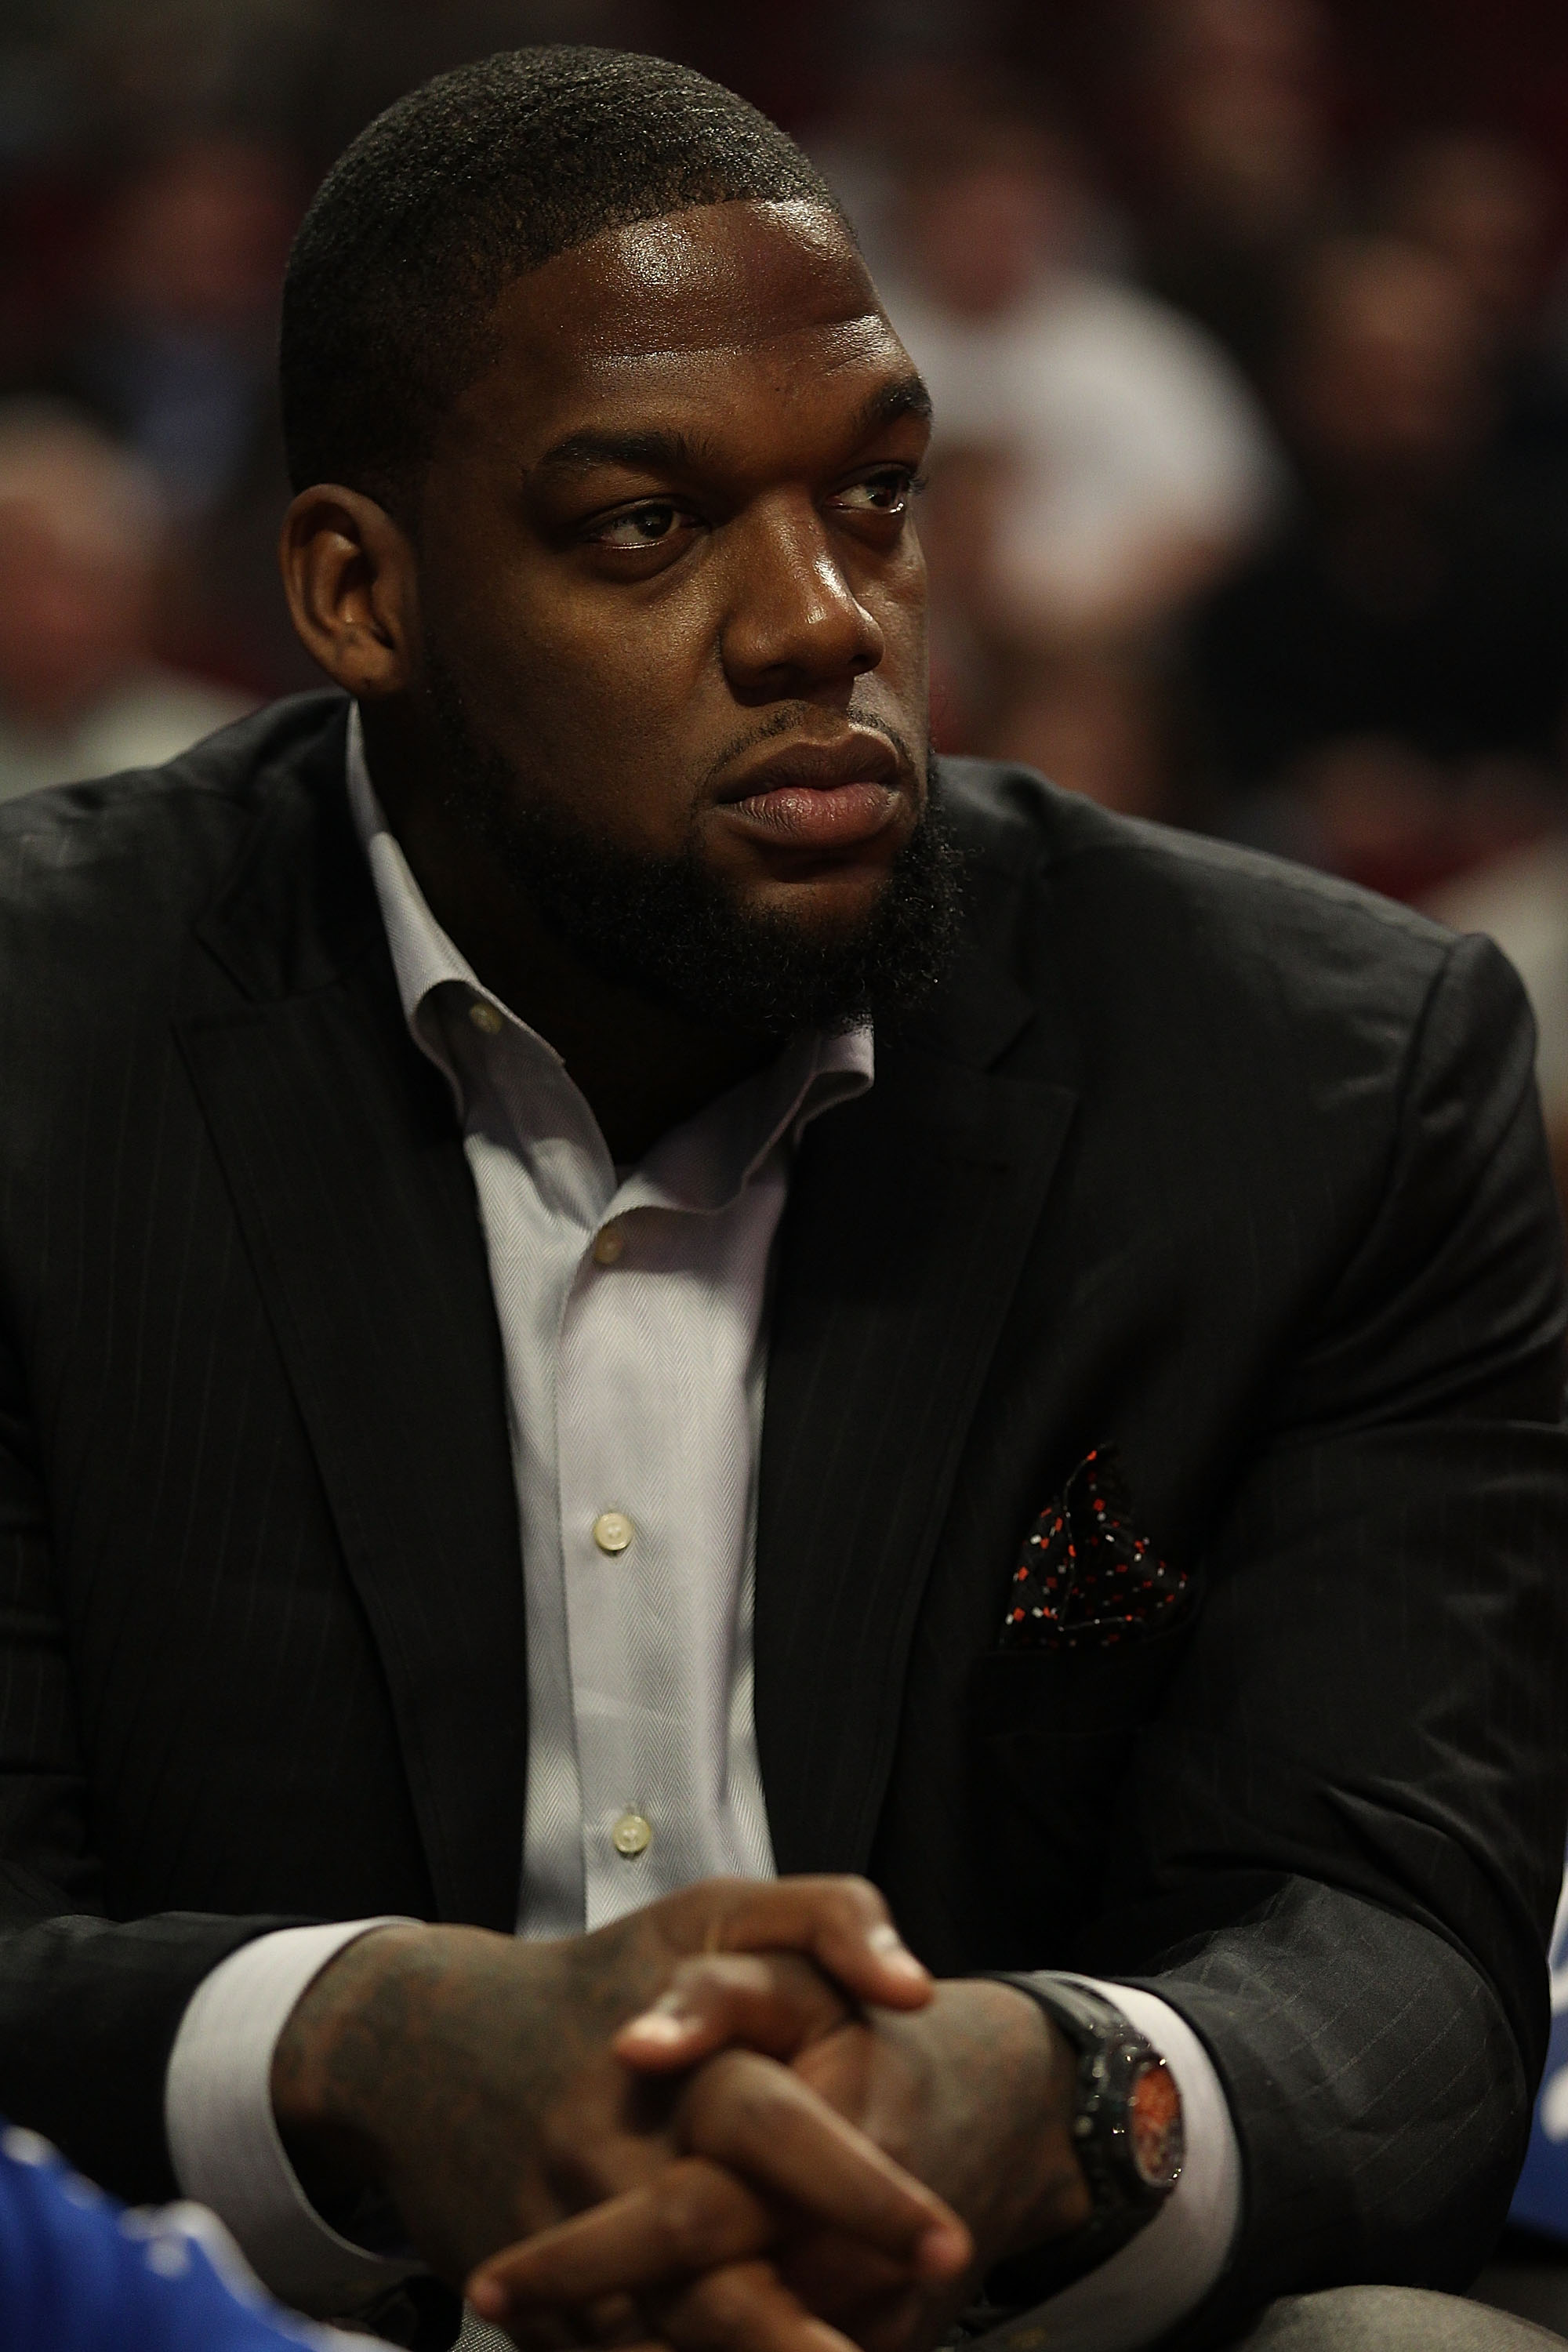 CHICAGO - NOVEMBER 04: Eddy Curry of the New York Knicks sits on the bench and watches his teammates take on the Chicago Bulls at the United Center on November 4, 2010 in Chicago, Illinois. NOTE TO USER: User expressly acknowledges and agrees that, by dow